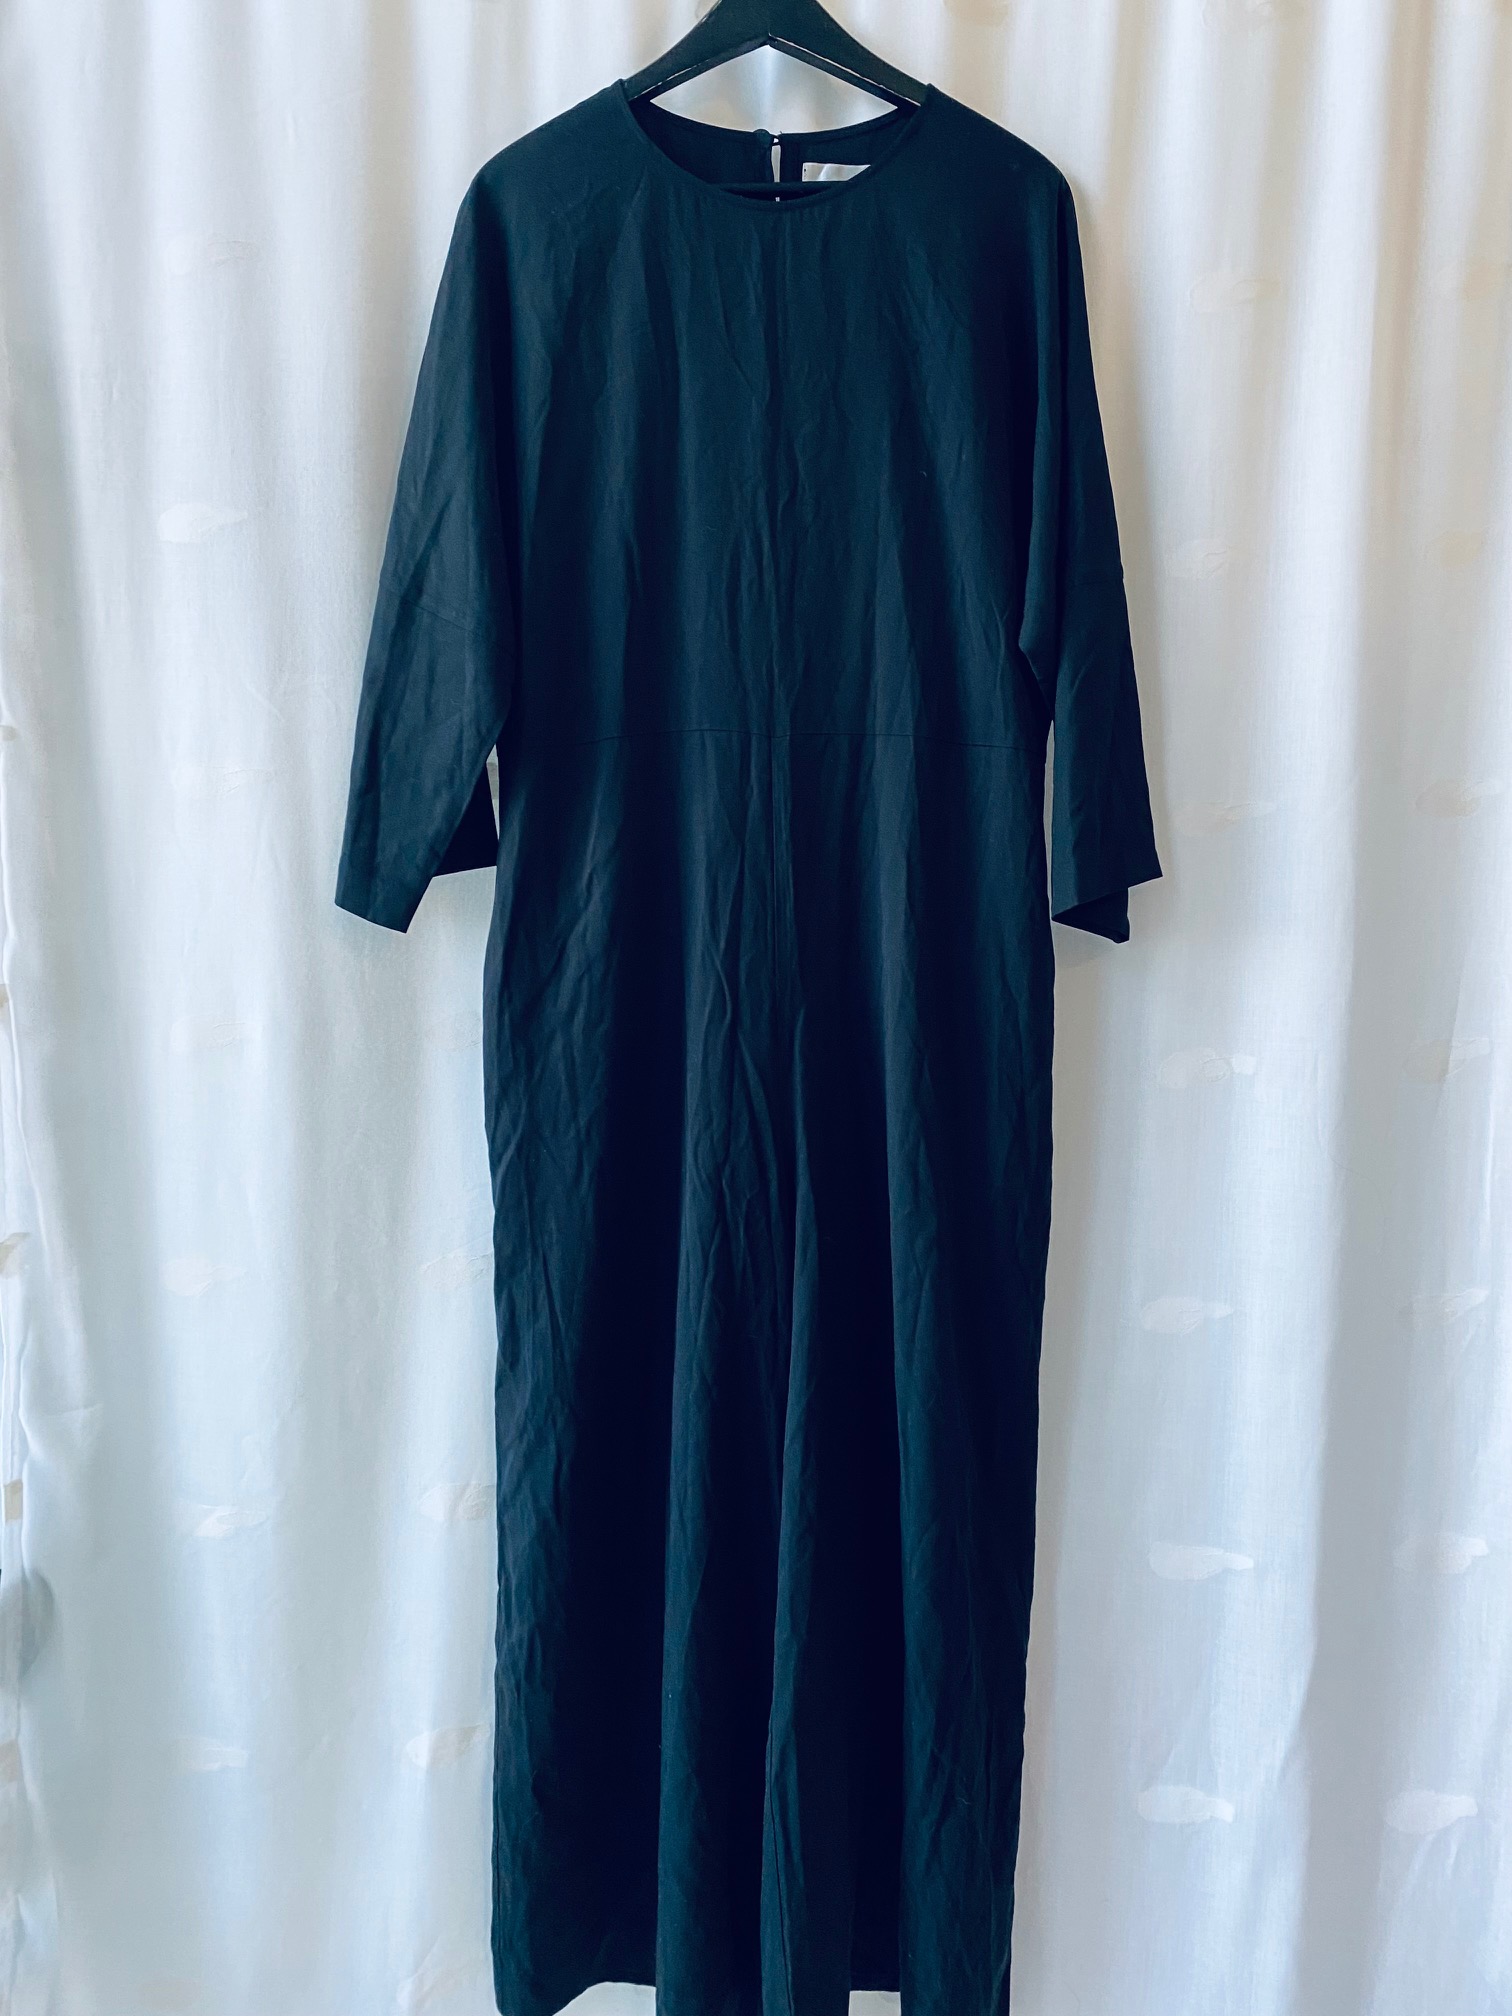 Jumpsuit 5Preview NWT